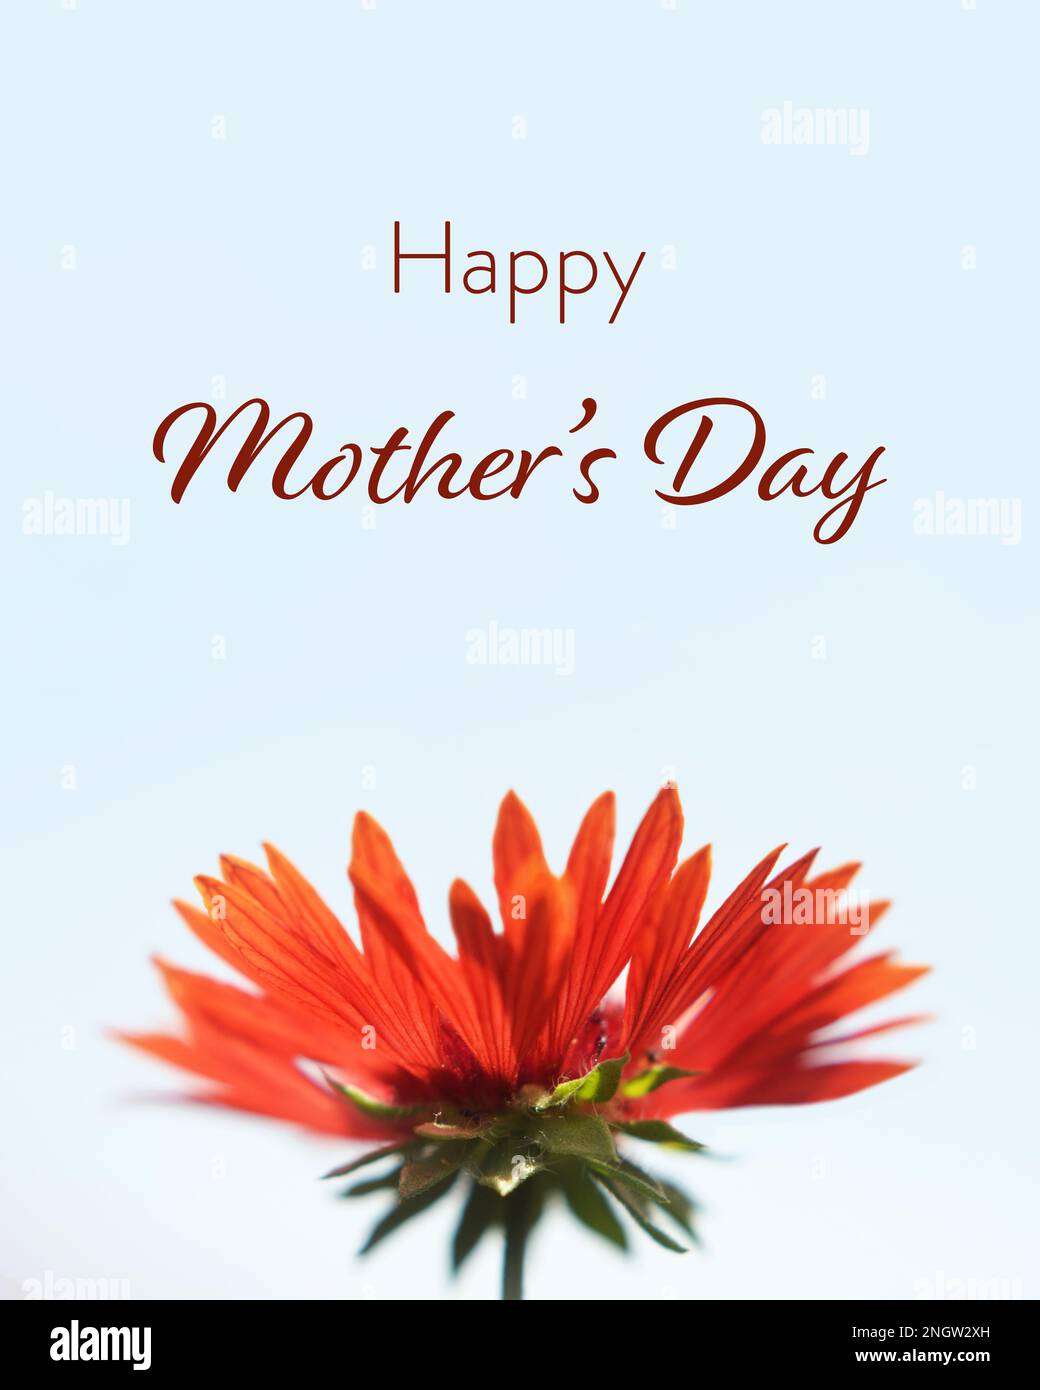 Happy Mothers Day card with red flower isolated on white background Stock Photo